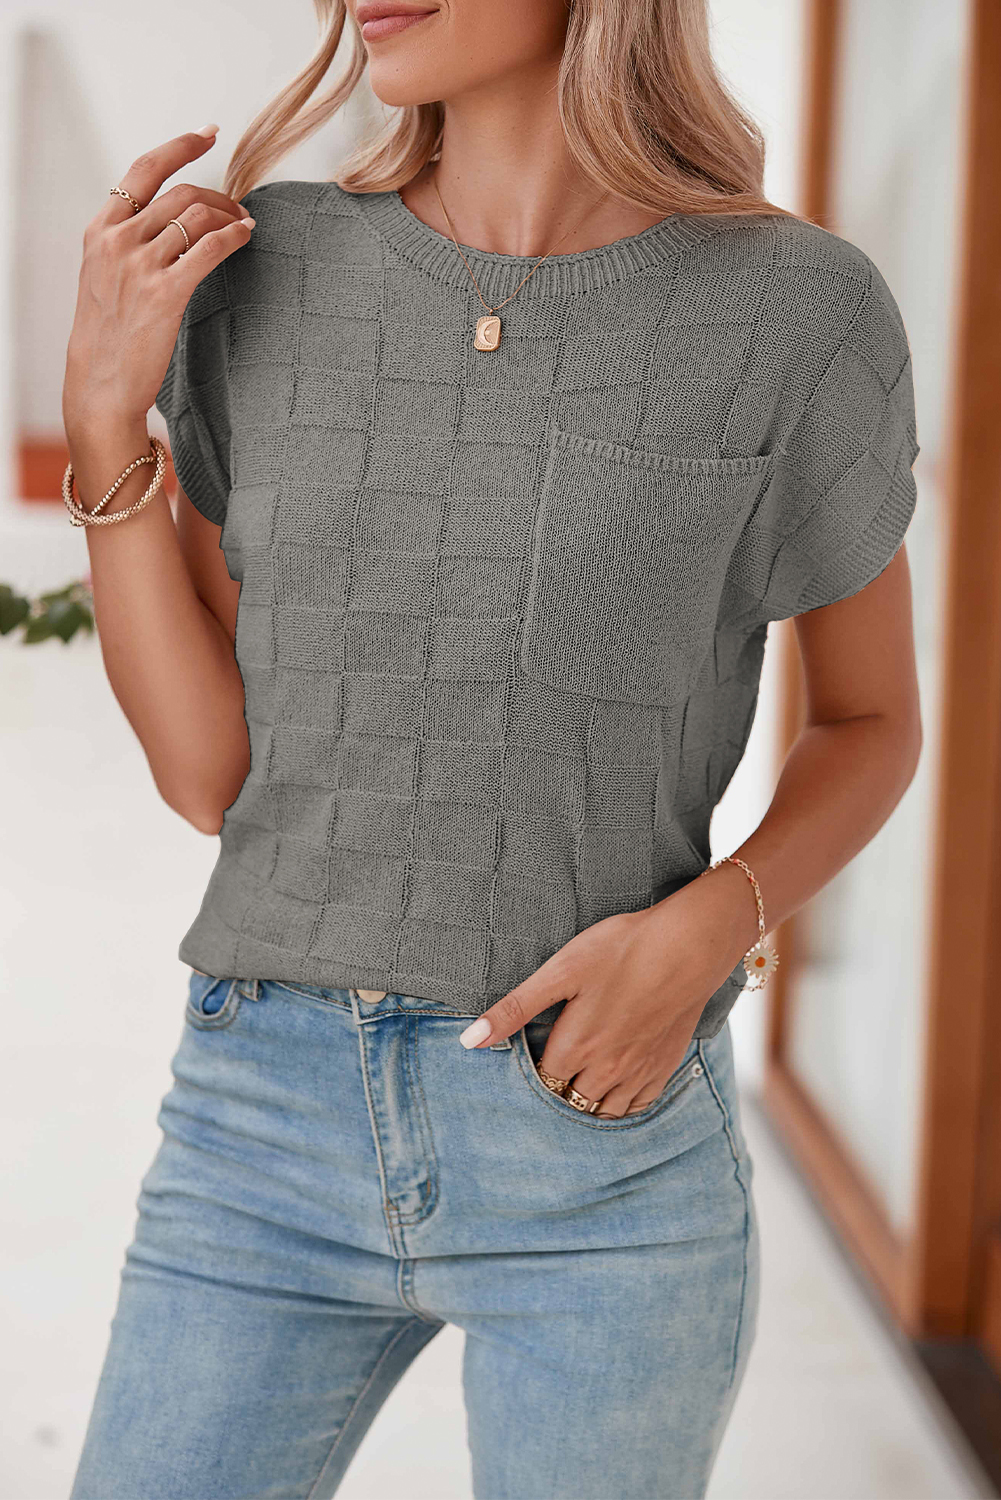 Shewin Wholesale Chic LADY Gray Lattice Textured Knit Chest Pocket Loose Blouse